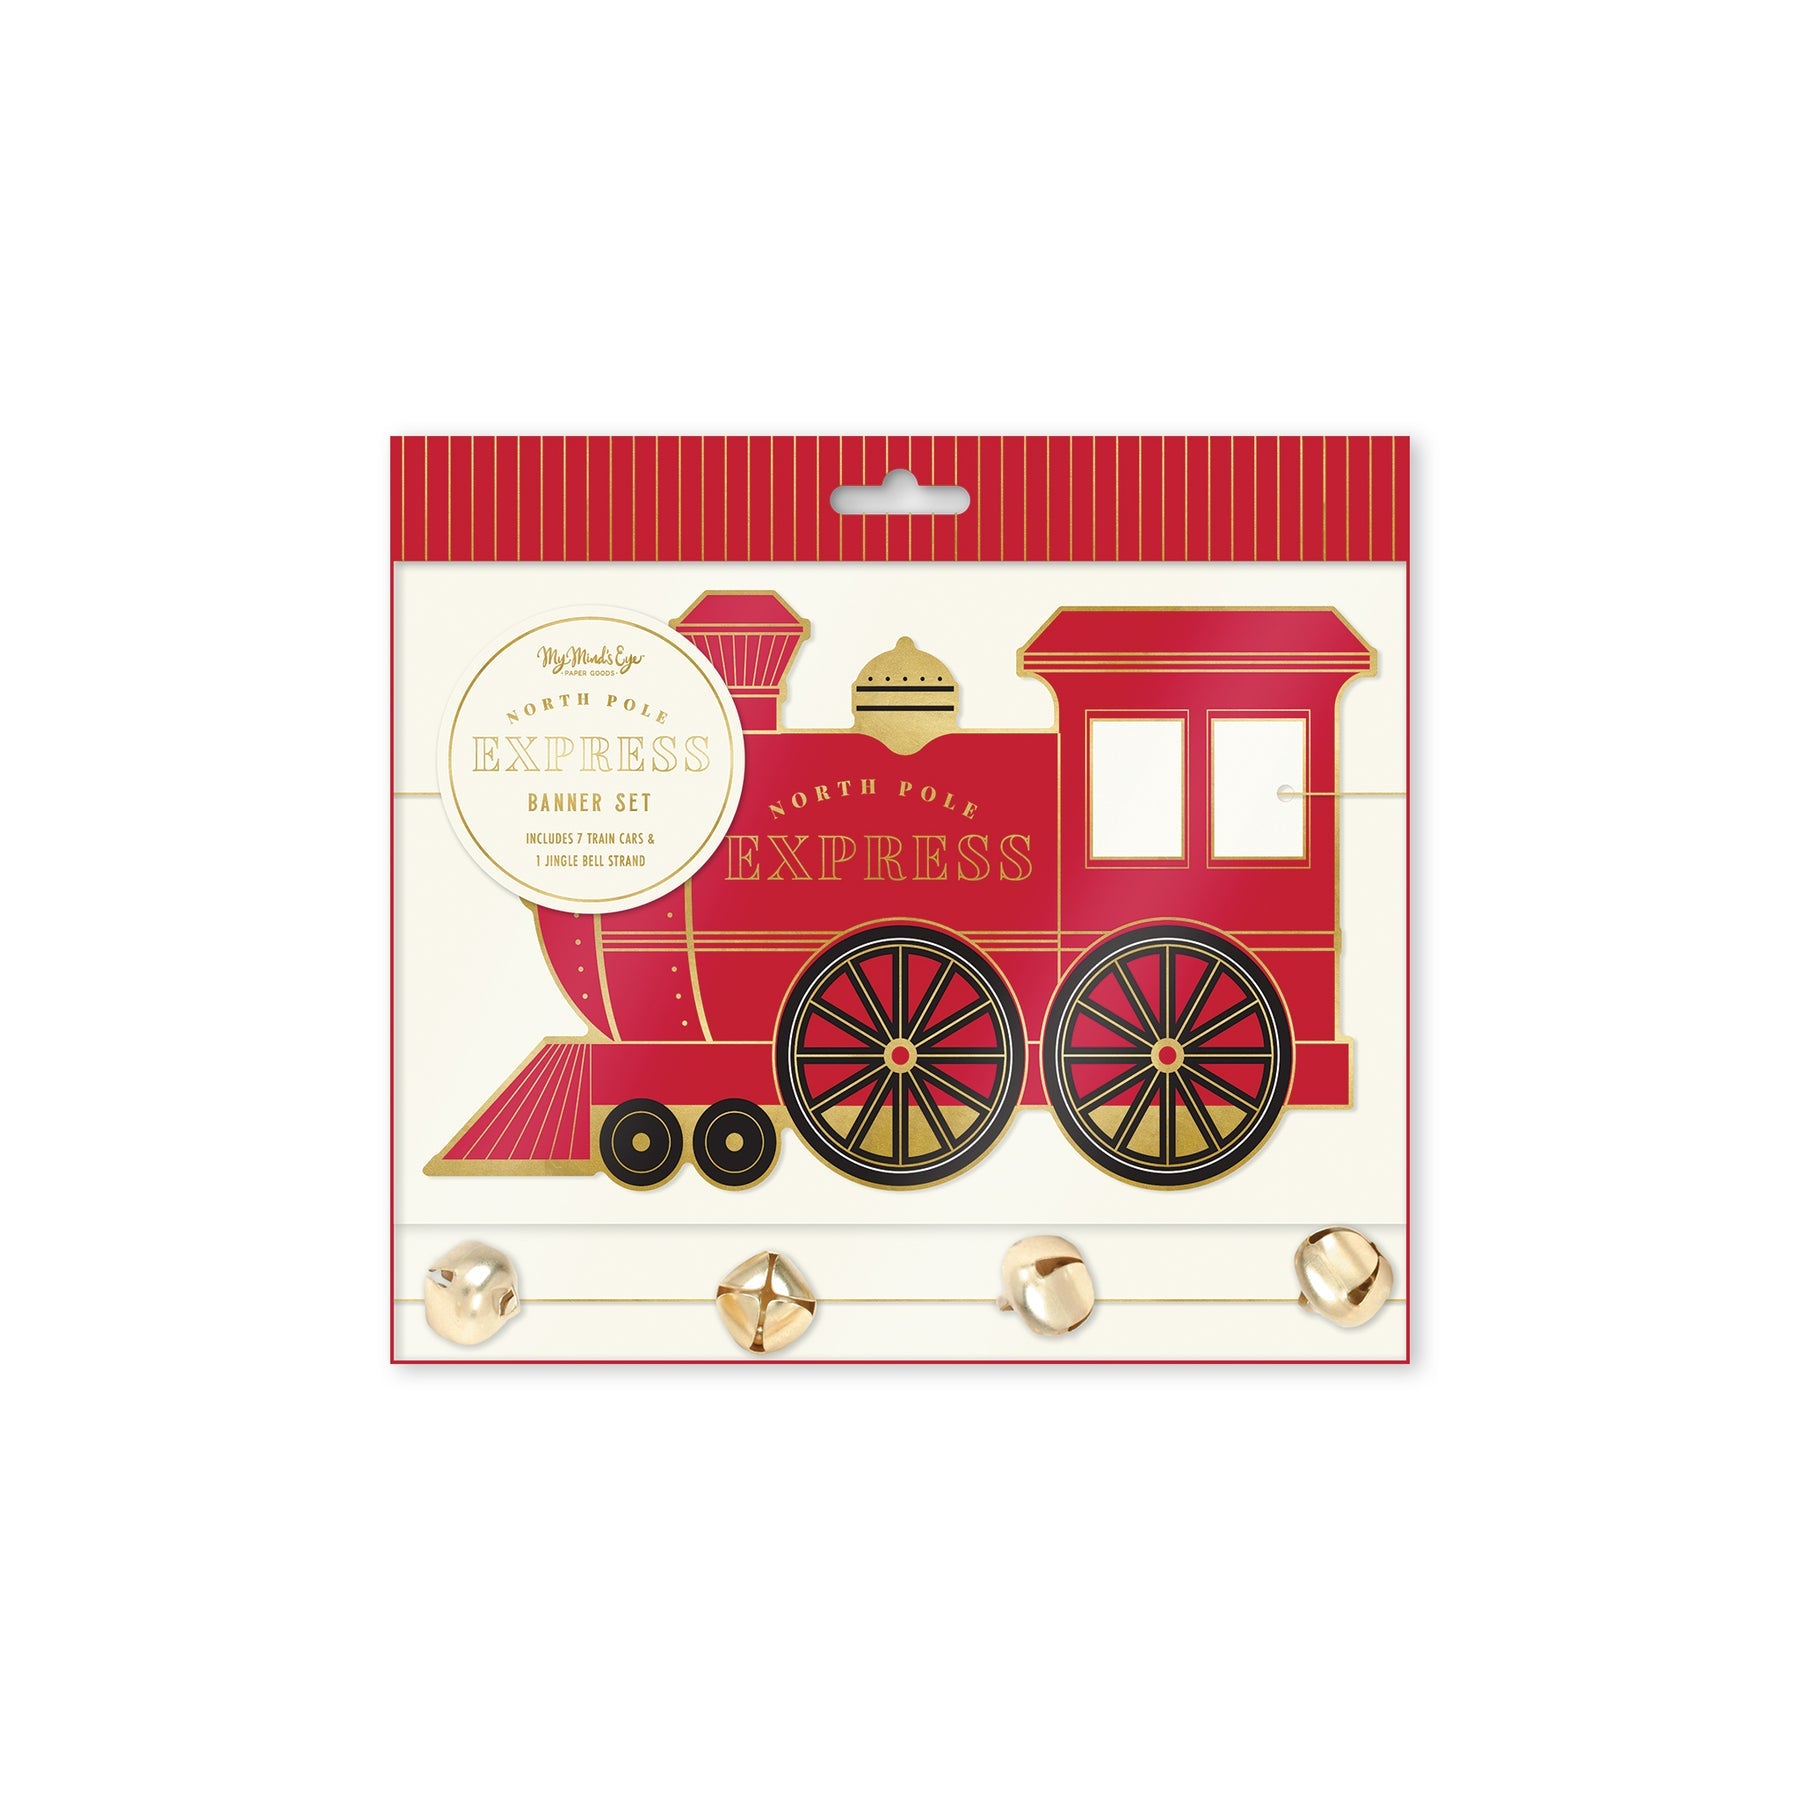 NORTH POLE EXPRESS TRAIN & BELL BANNER SET